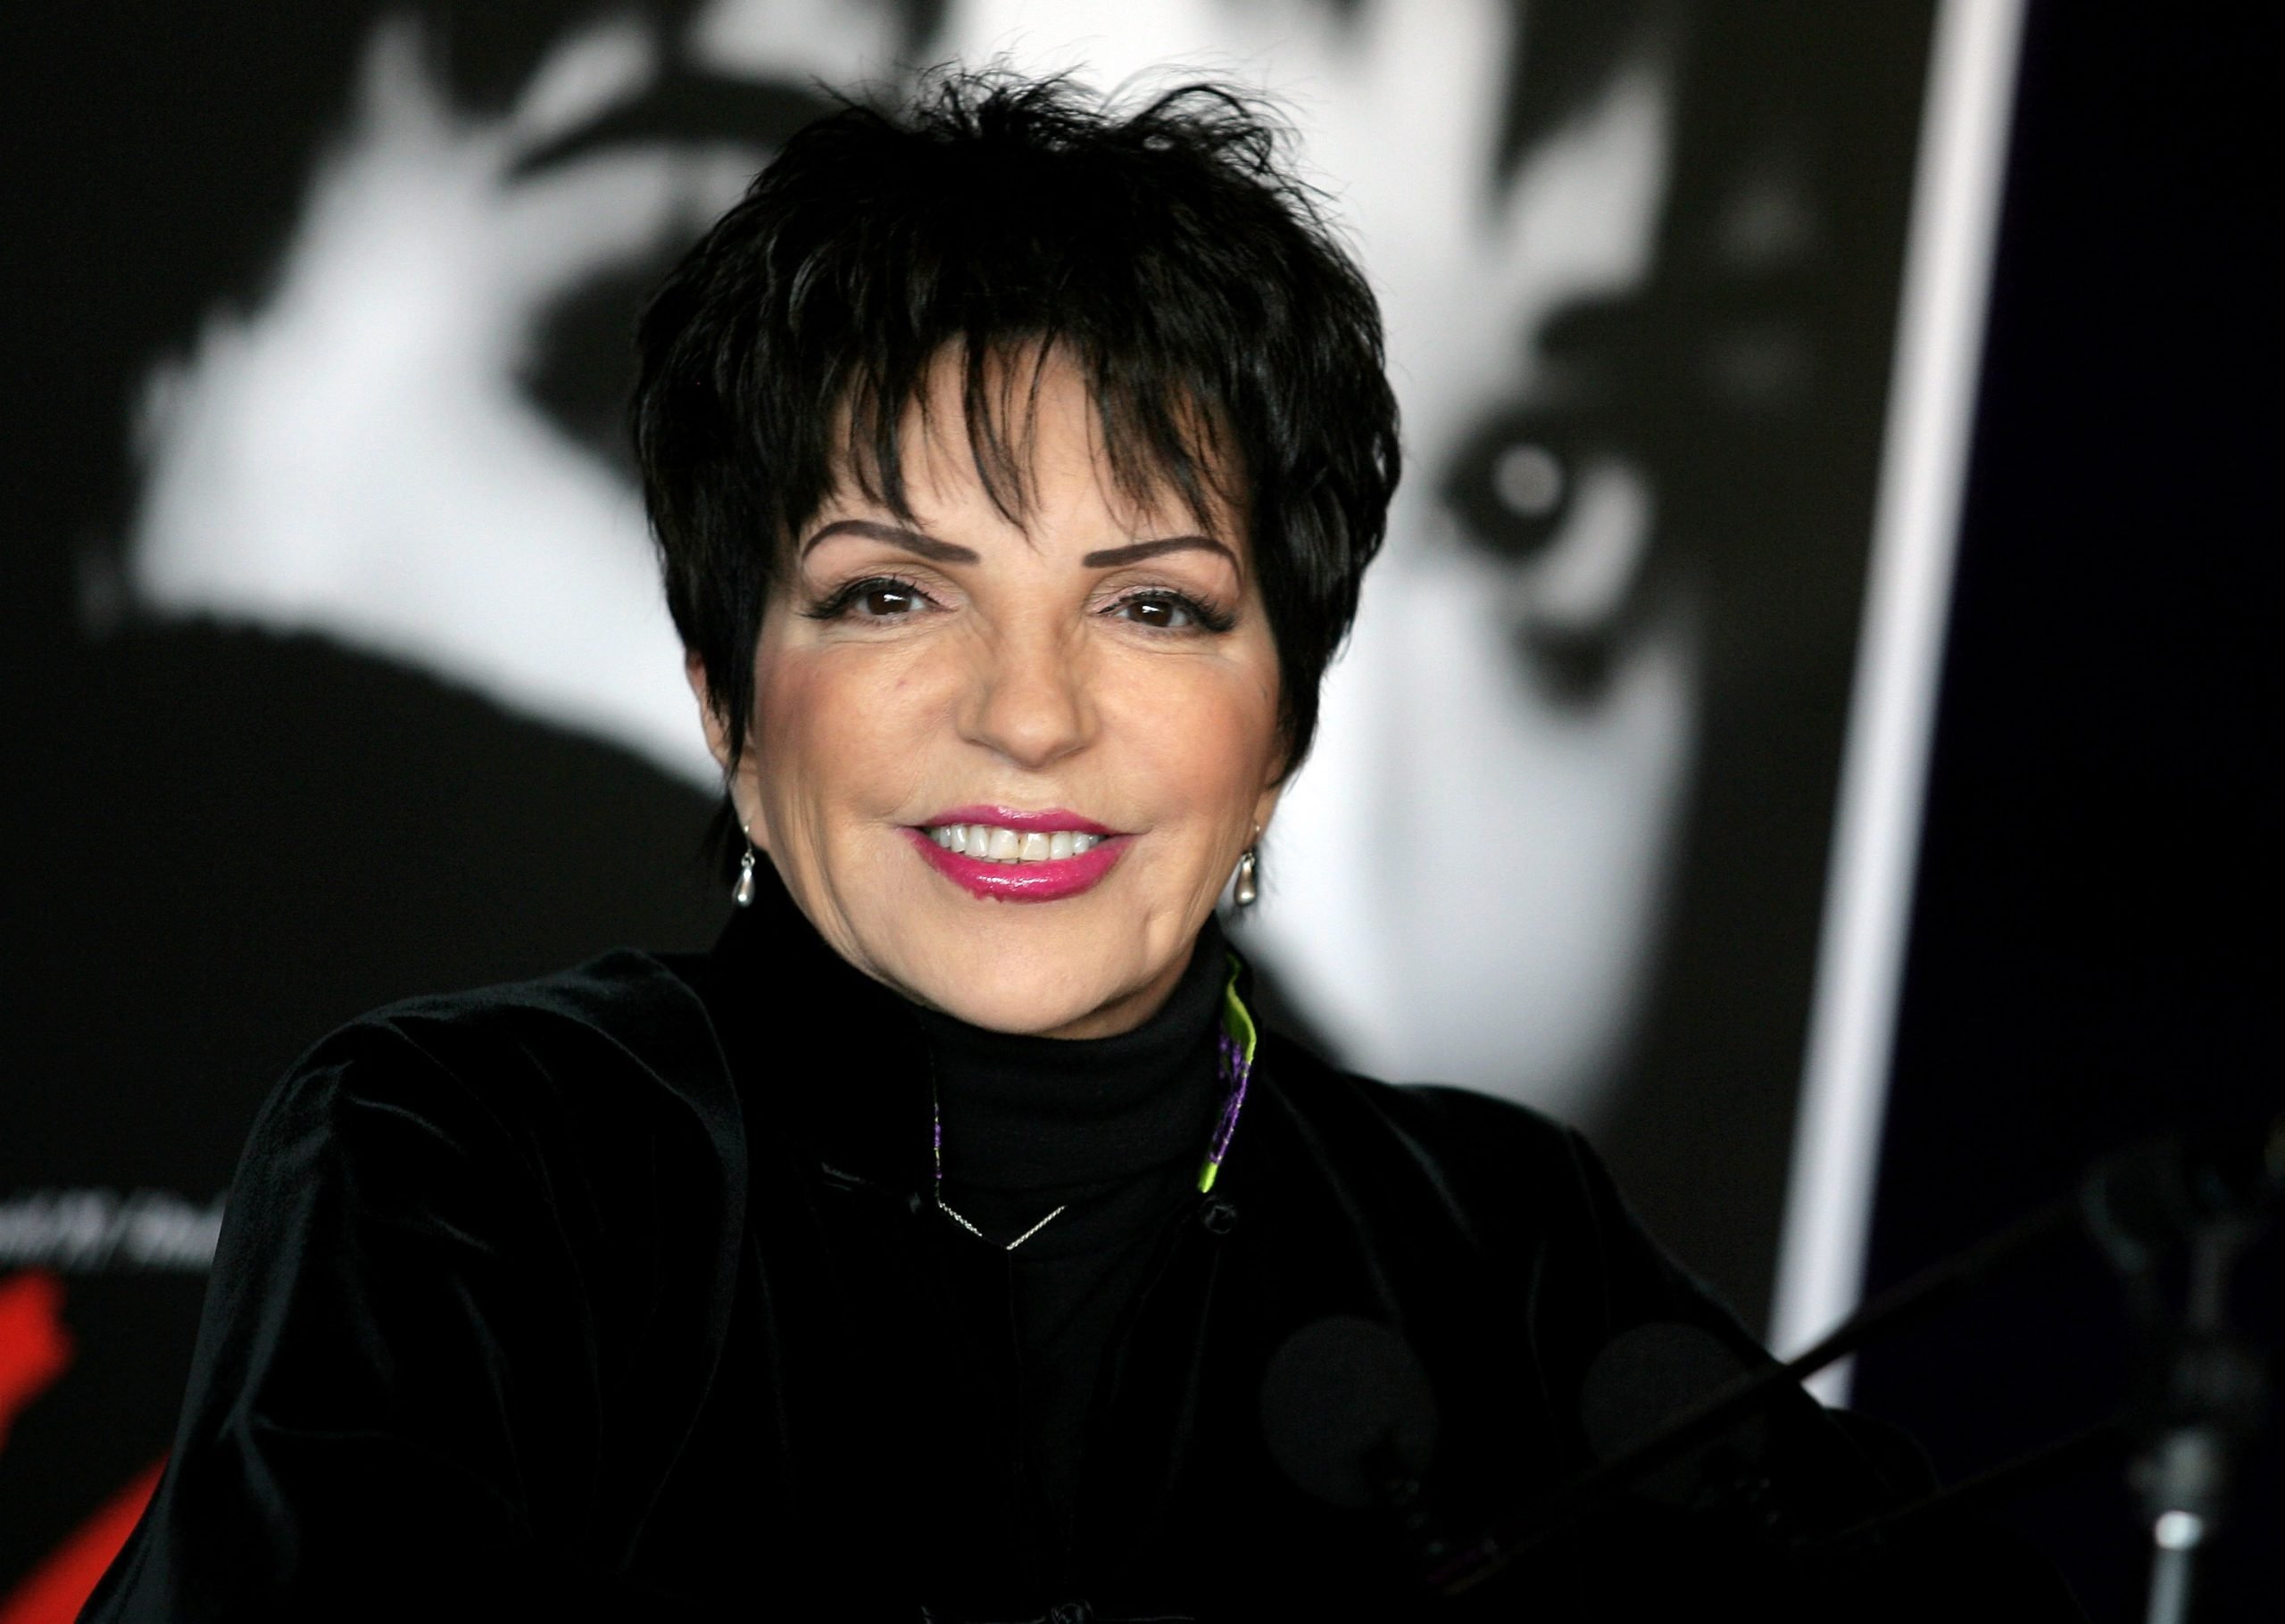 Liza Minnelli attends a press conference ahead of her tour 'Liza's at the Palace' at the Sydney Opera House on October 13, 2009 in Sydney